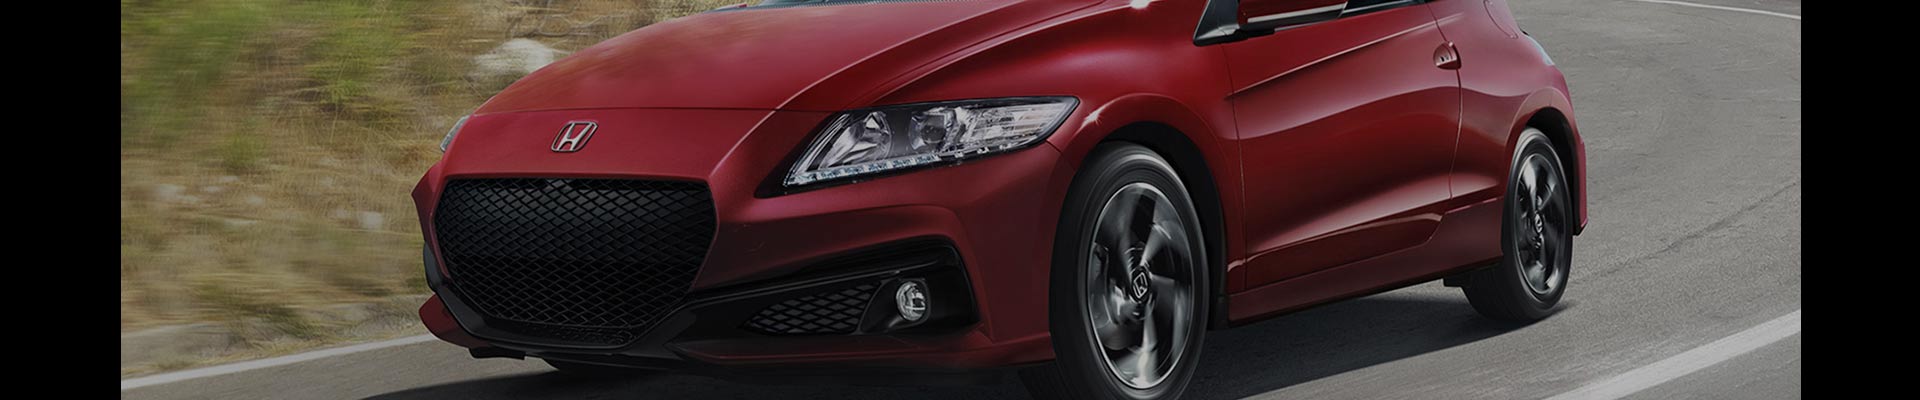 Shop Replacement and OEM Honda CR-Z Parts with Discounted Price on the Net